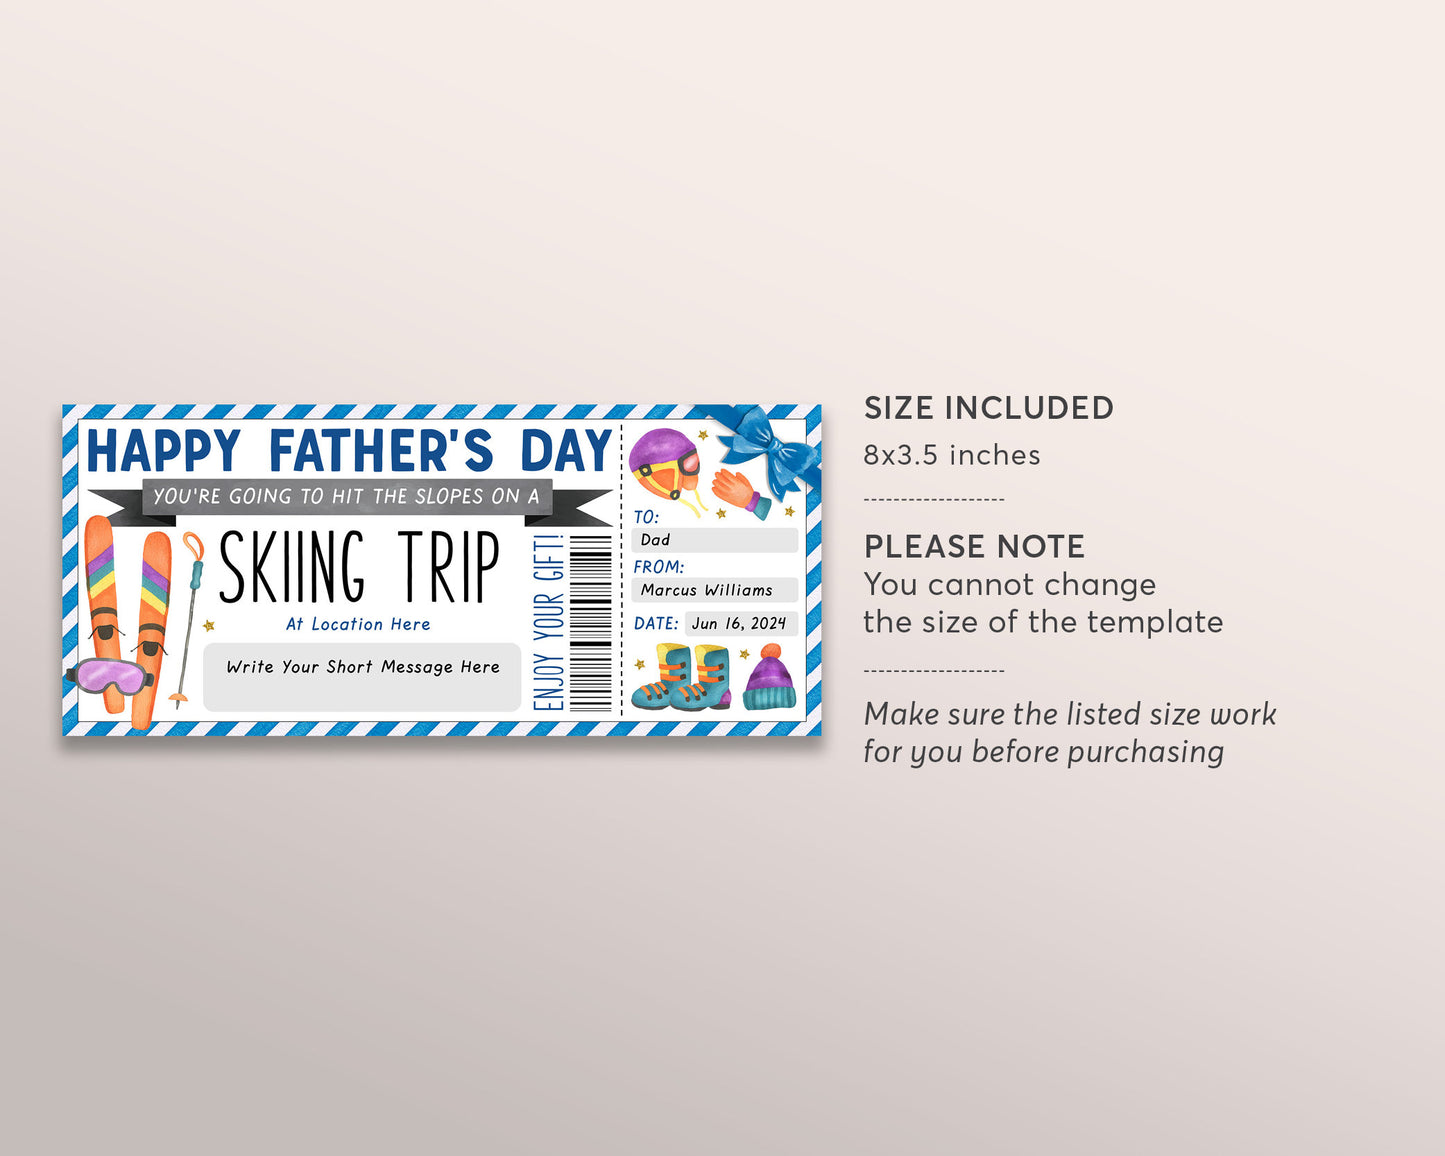 Fathers Day Skiing Trip Gift Certificate Editable Template, Surprise Holiday Ski Pass Vacation Gift Voucher For Dad, Skiing Lessons Training